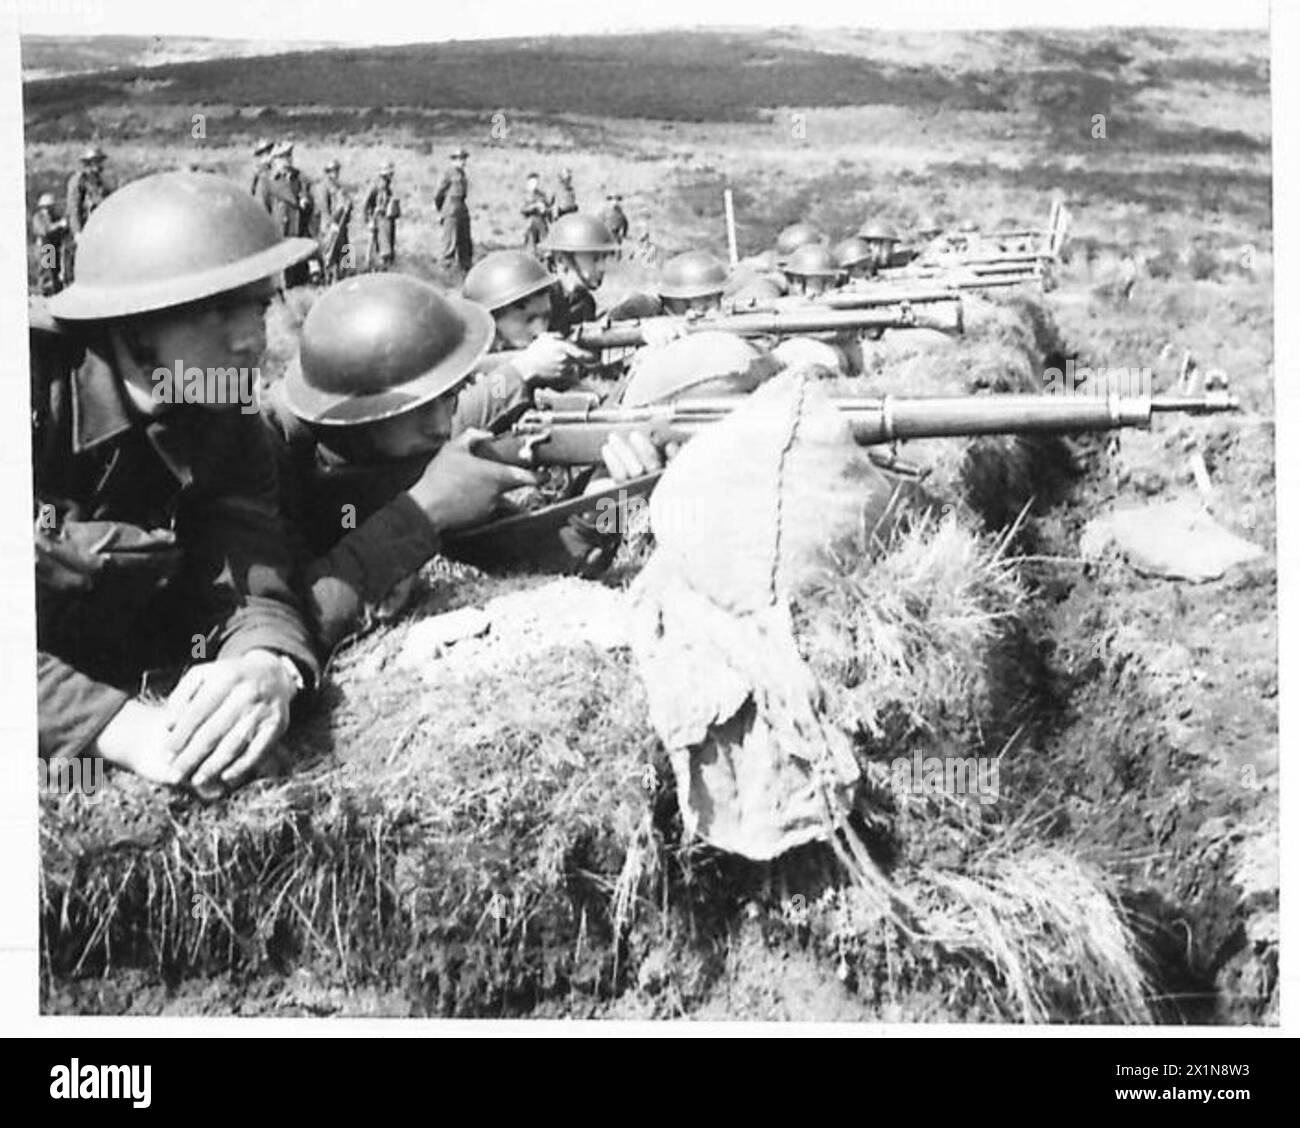 ON THE RANGES - Men of a battalion of the Gordon Highlanders on the ranges, British Army Stock Photo